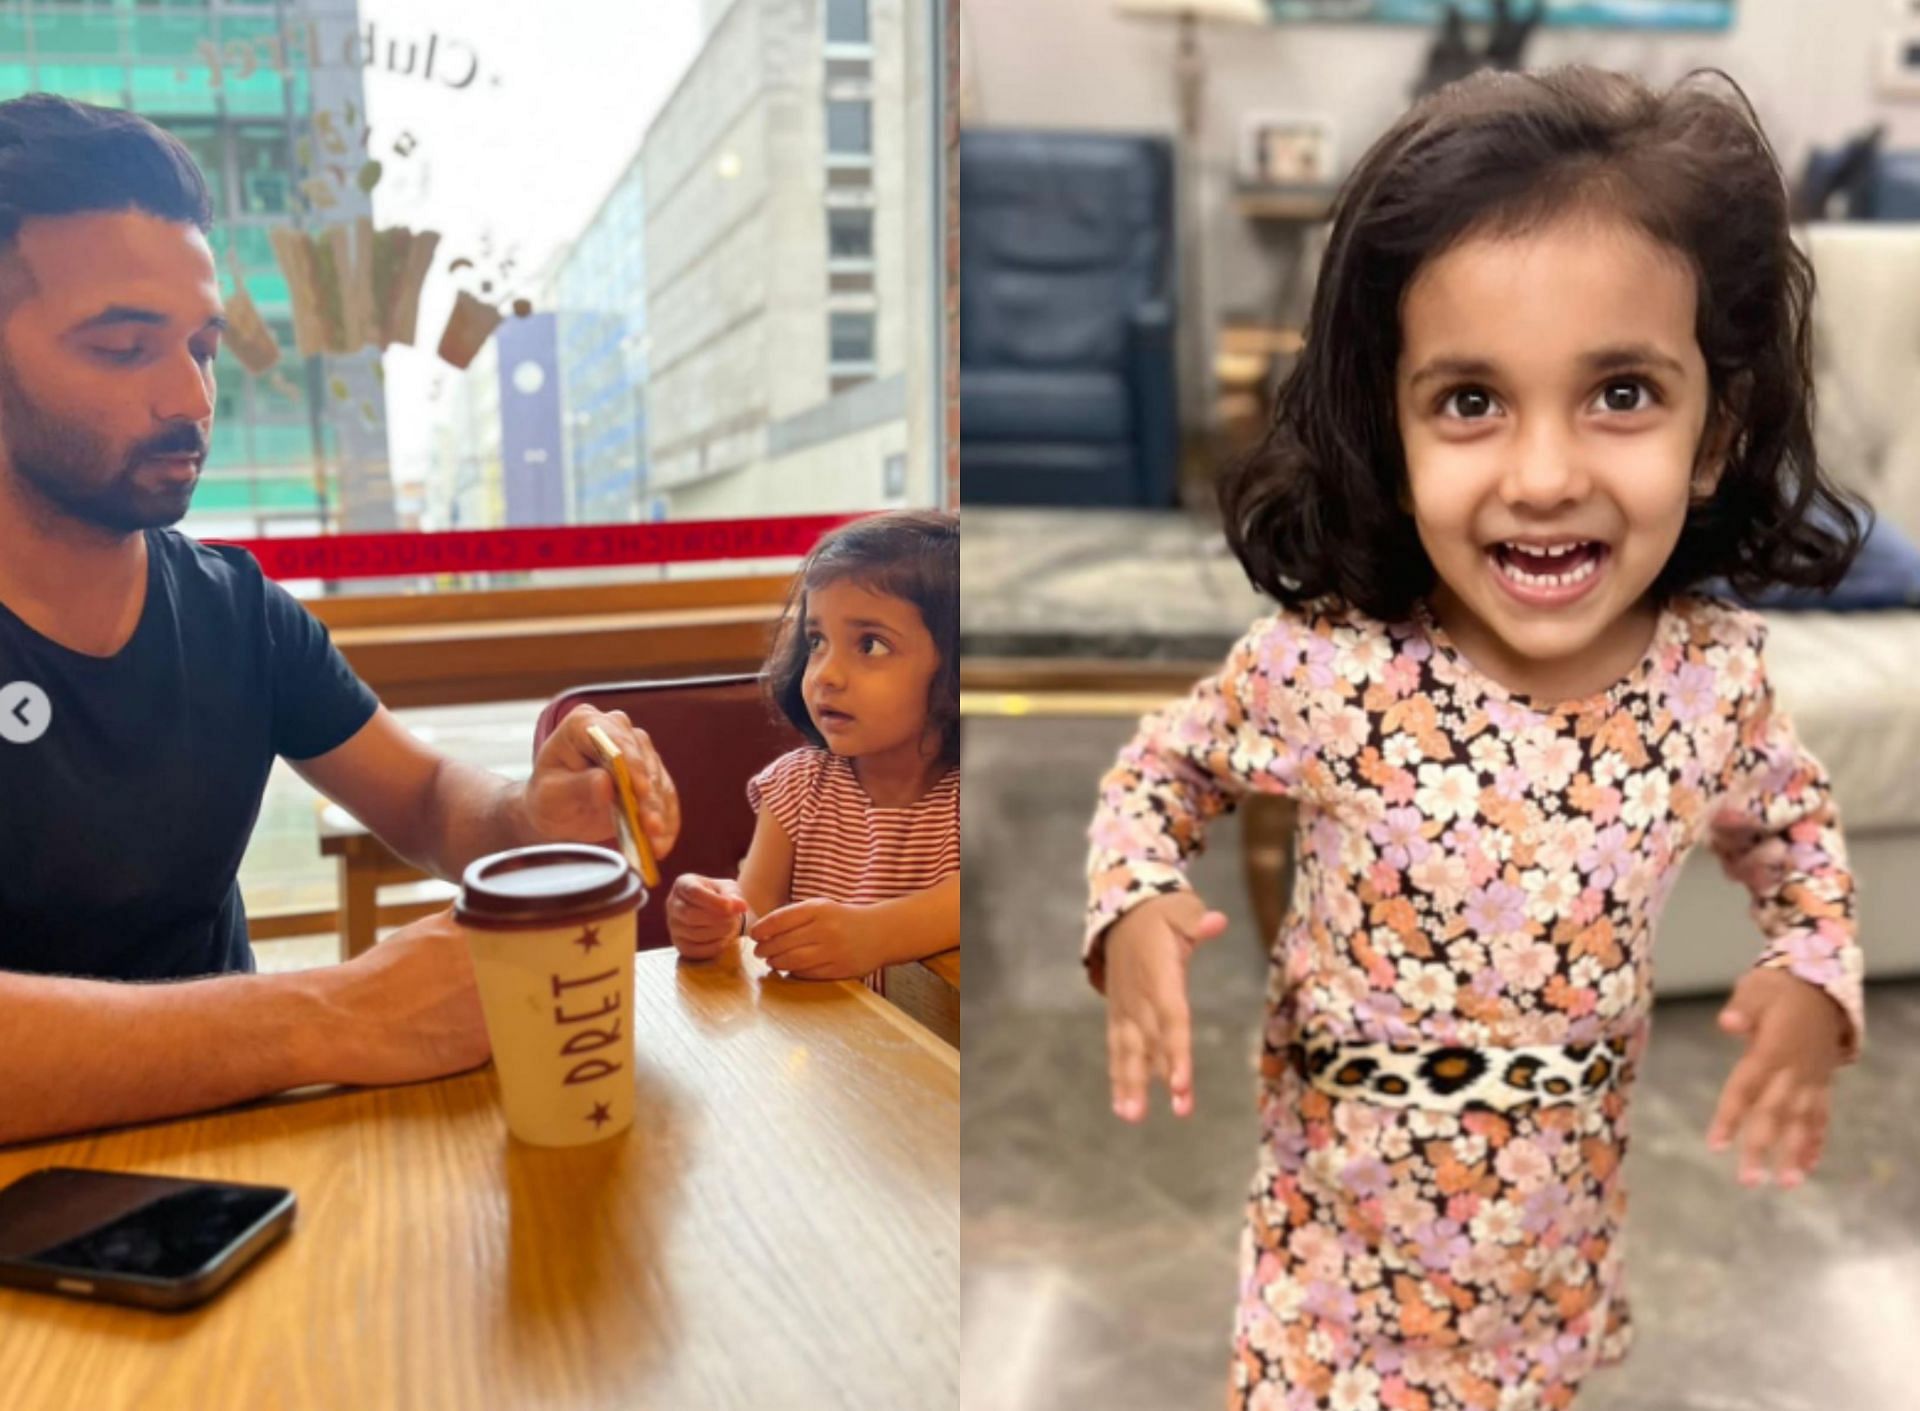 “Your smiles light up our world! Keep shining bright” – Ajinkya Rahane dedicates an adorable post to his daughter Aarya on her 4th Birthday